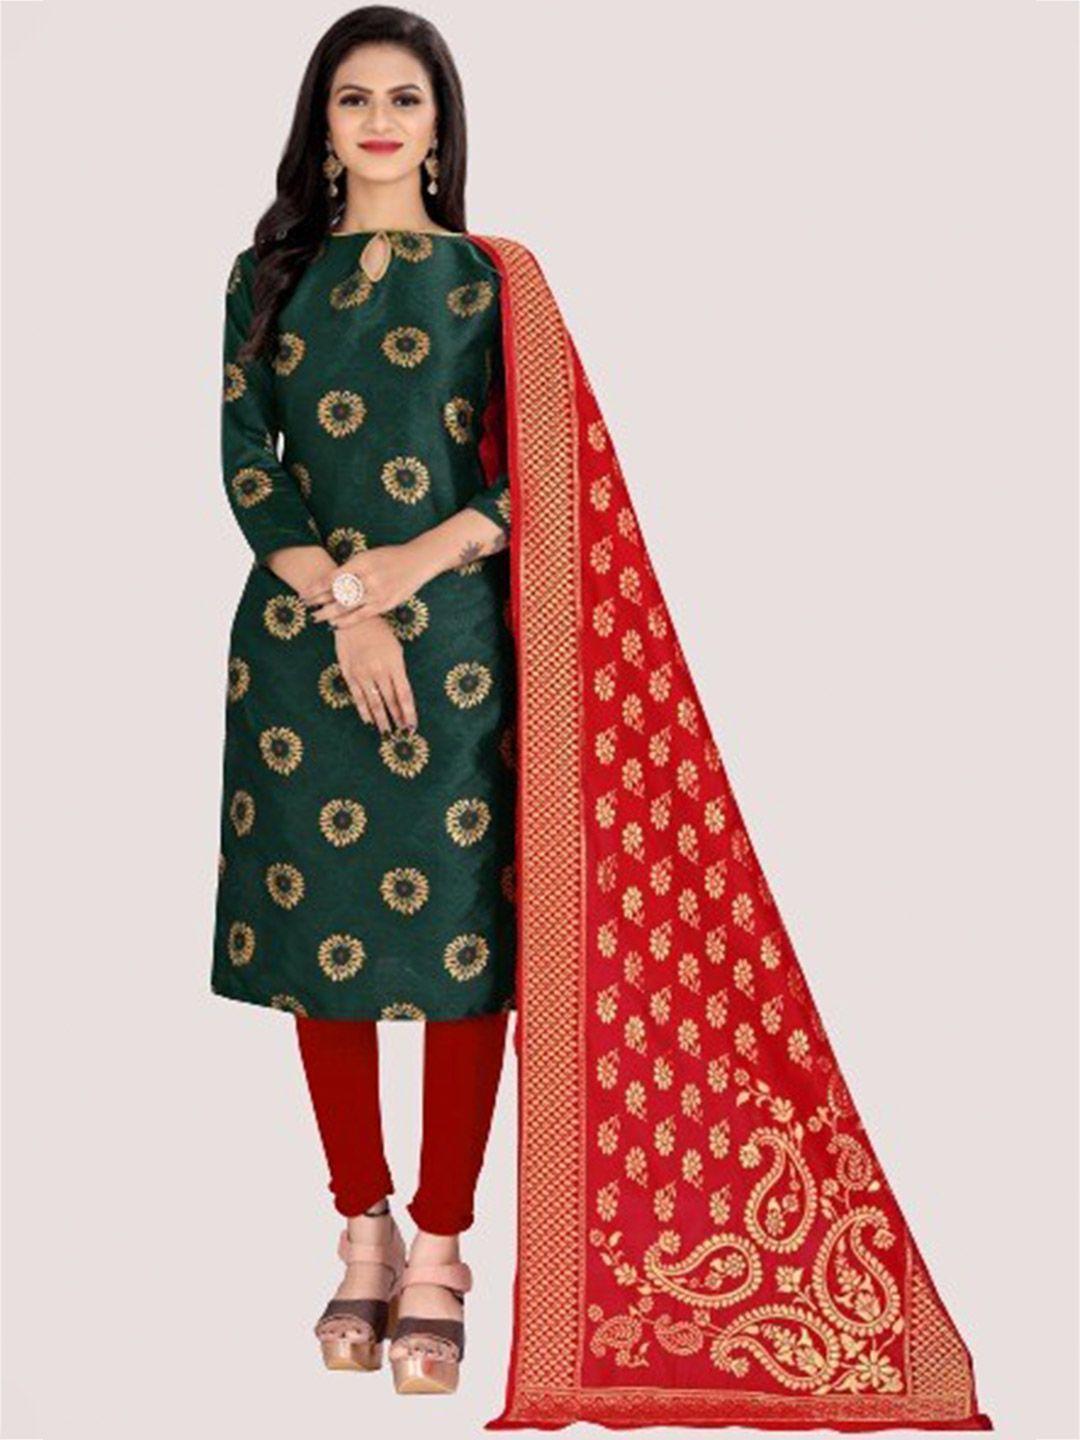 morly-women--green-&-red-dupion-silk-unstitched-dress-material